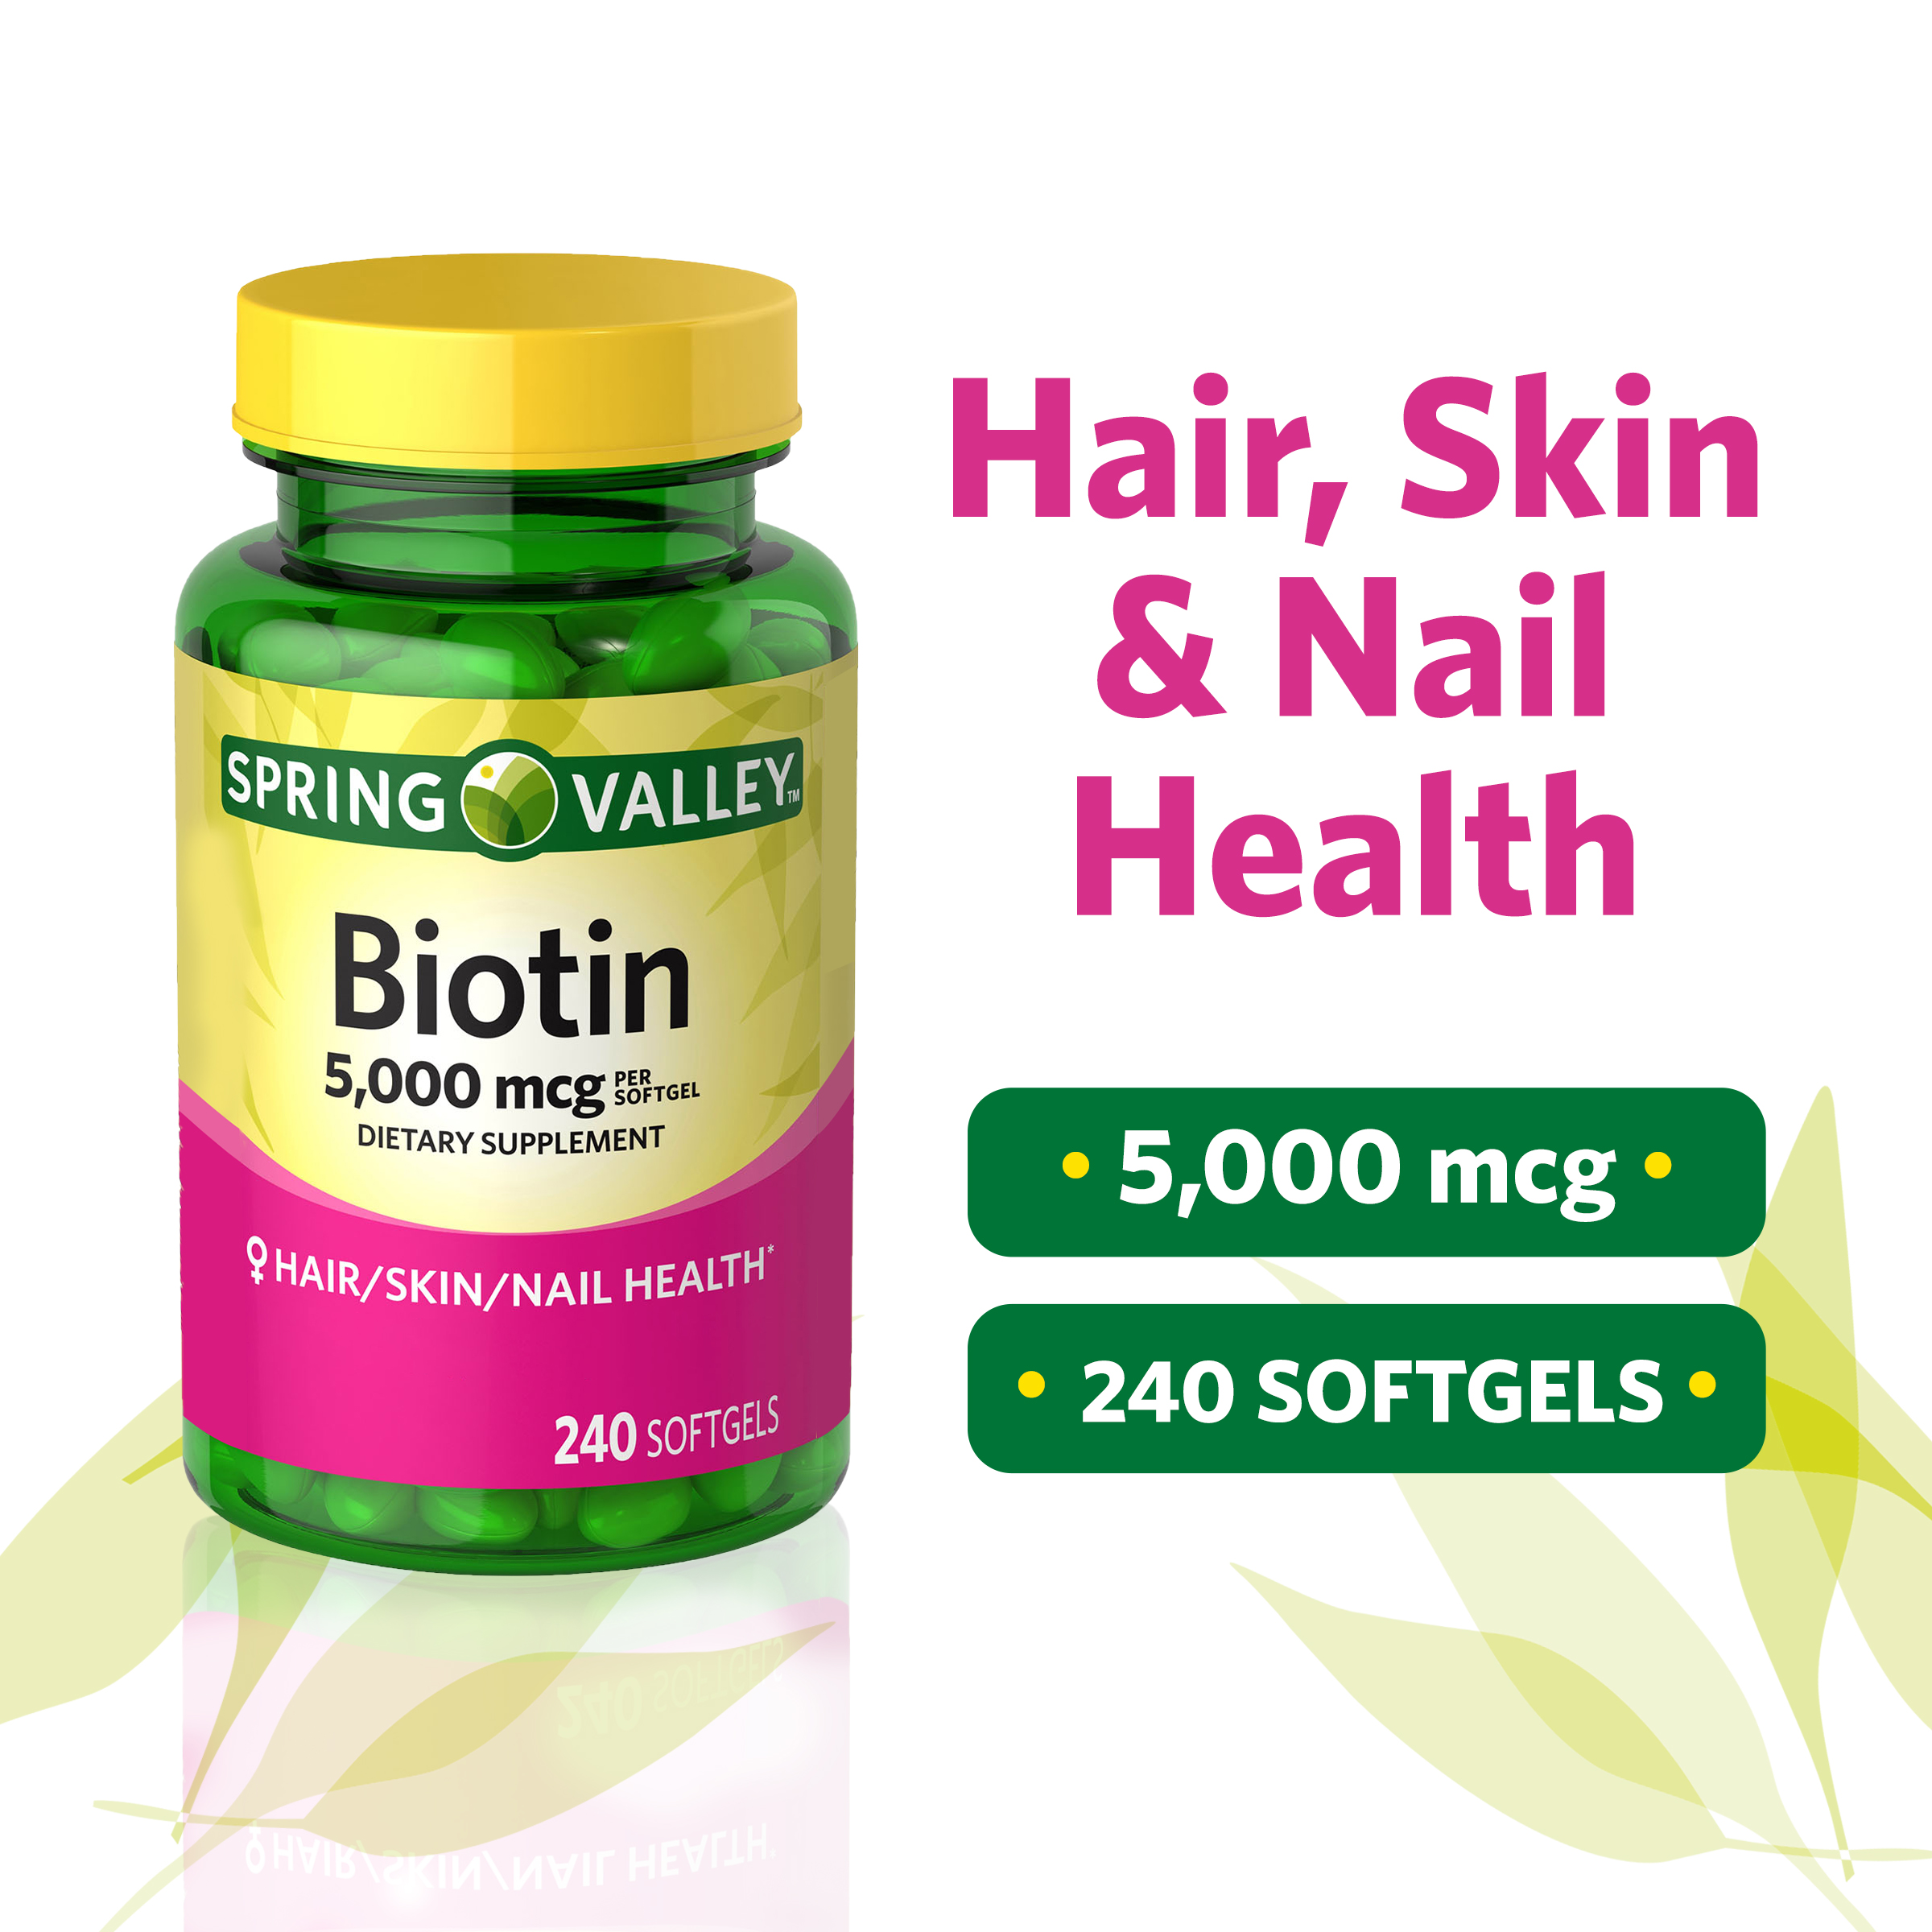 Spring Valley Biotin Softgels Dietary Supplement, 5,000 mcg, 240 Count - image 2 of 16